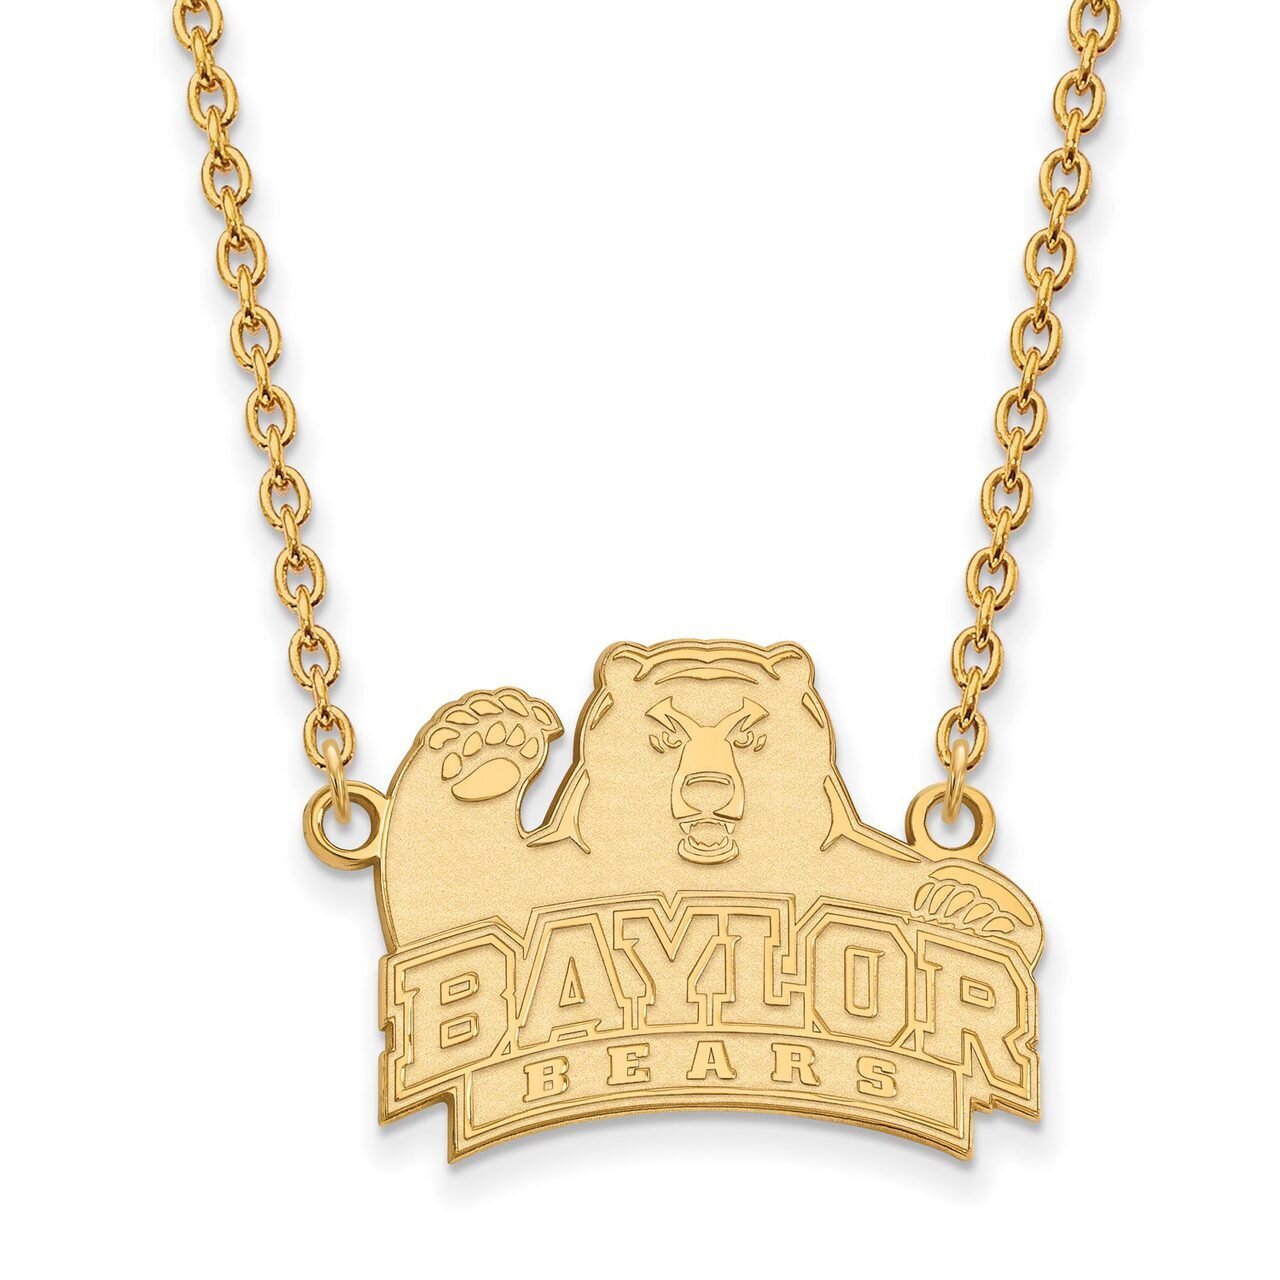 Baylor University Large Pendant with Chain Necklace 10k Yellow Gold 1Y014BU-18